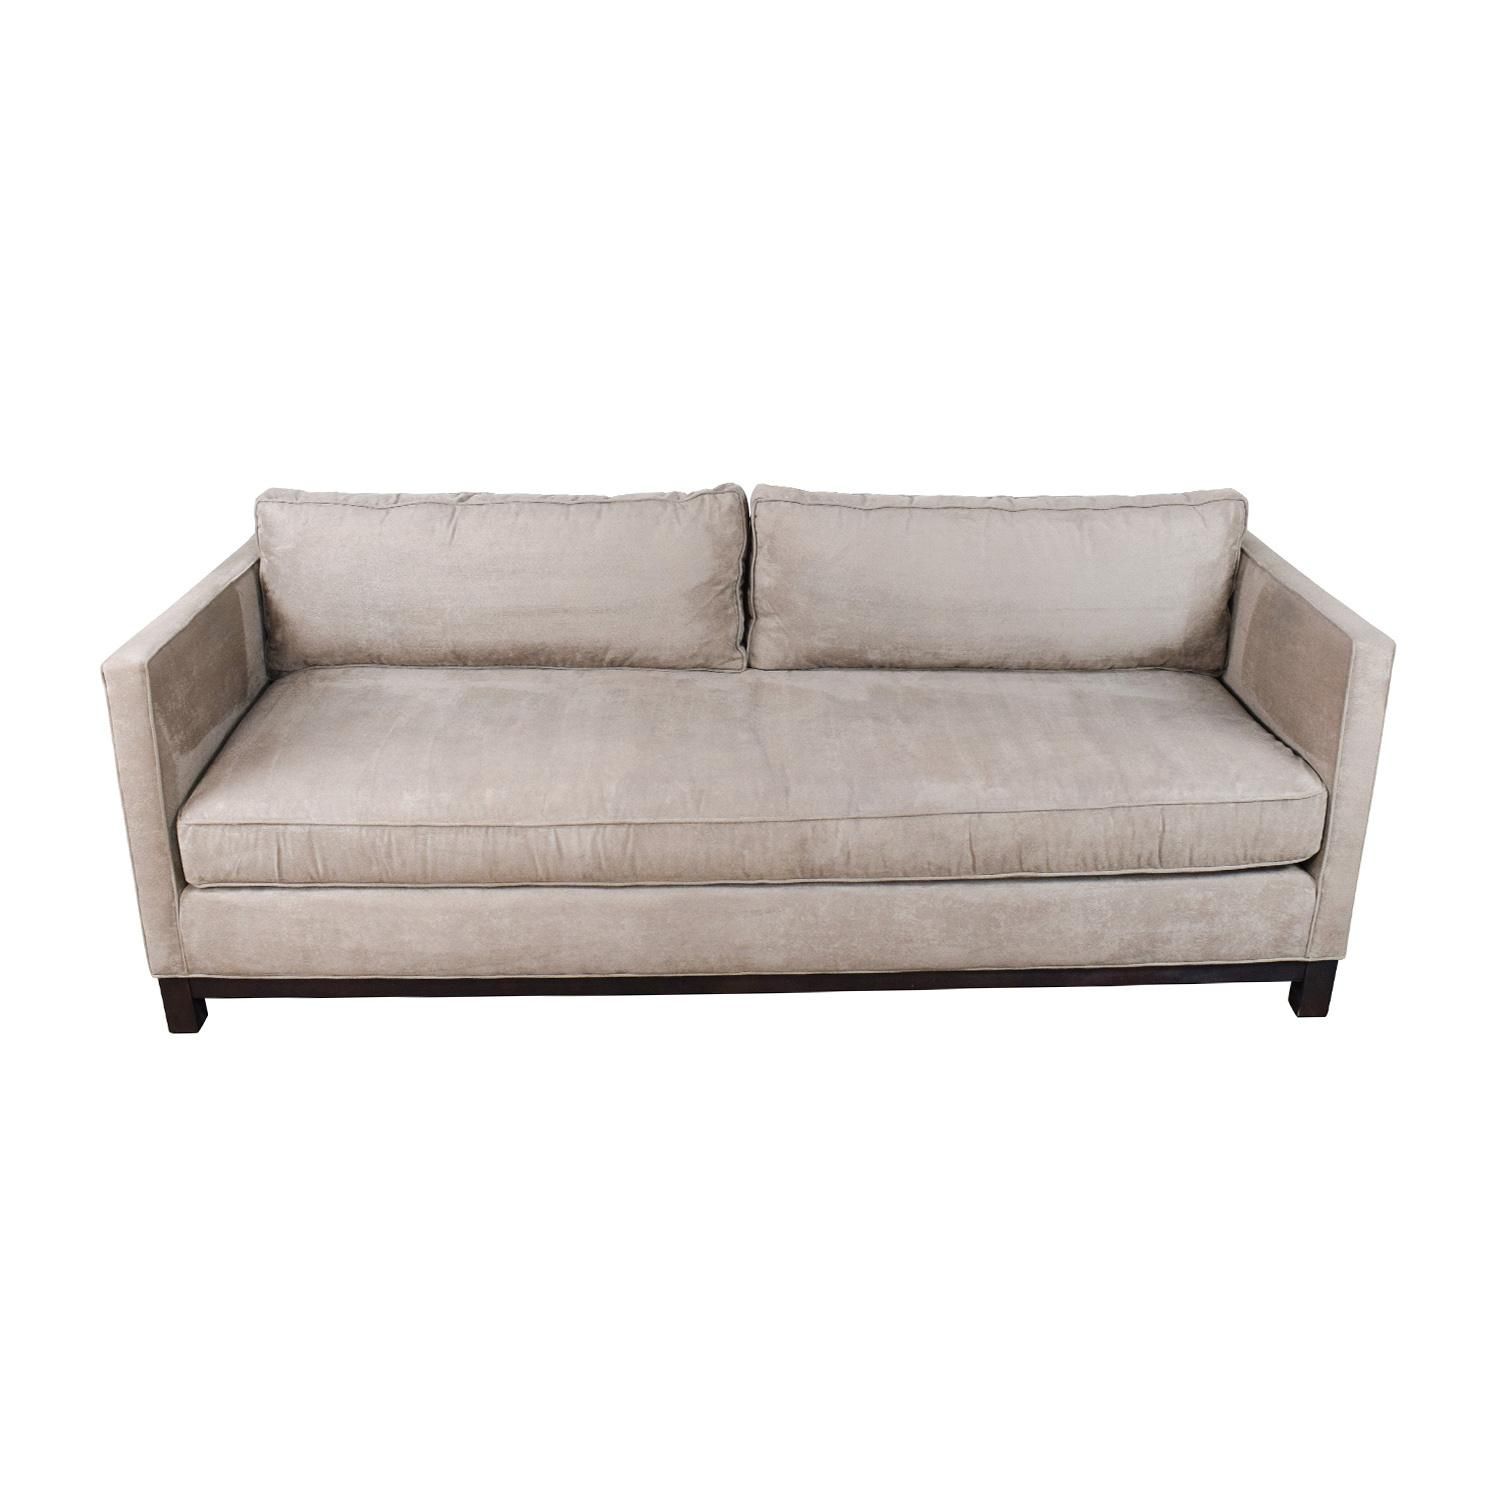 Furniture Home : Outstanding Mitchell Gold Clifton Sectional Sofa Inside Mitchell Gold Sofa Slipcovers (View 10 of 20)